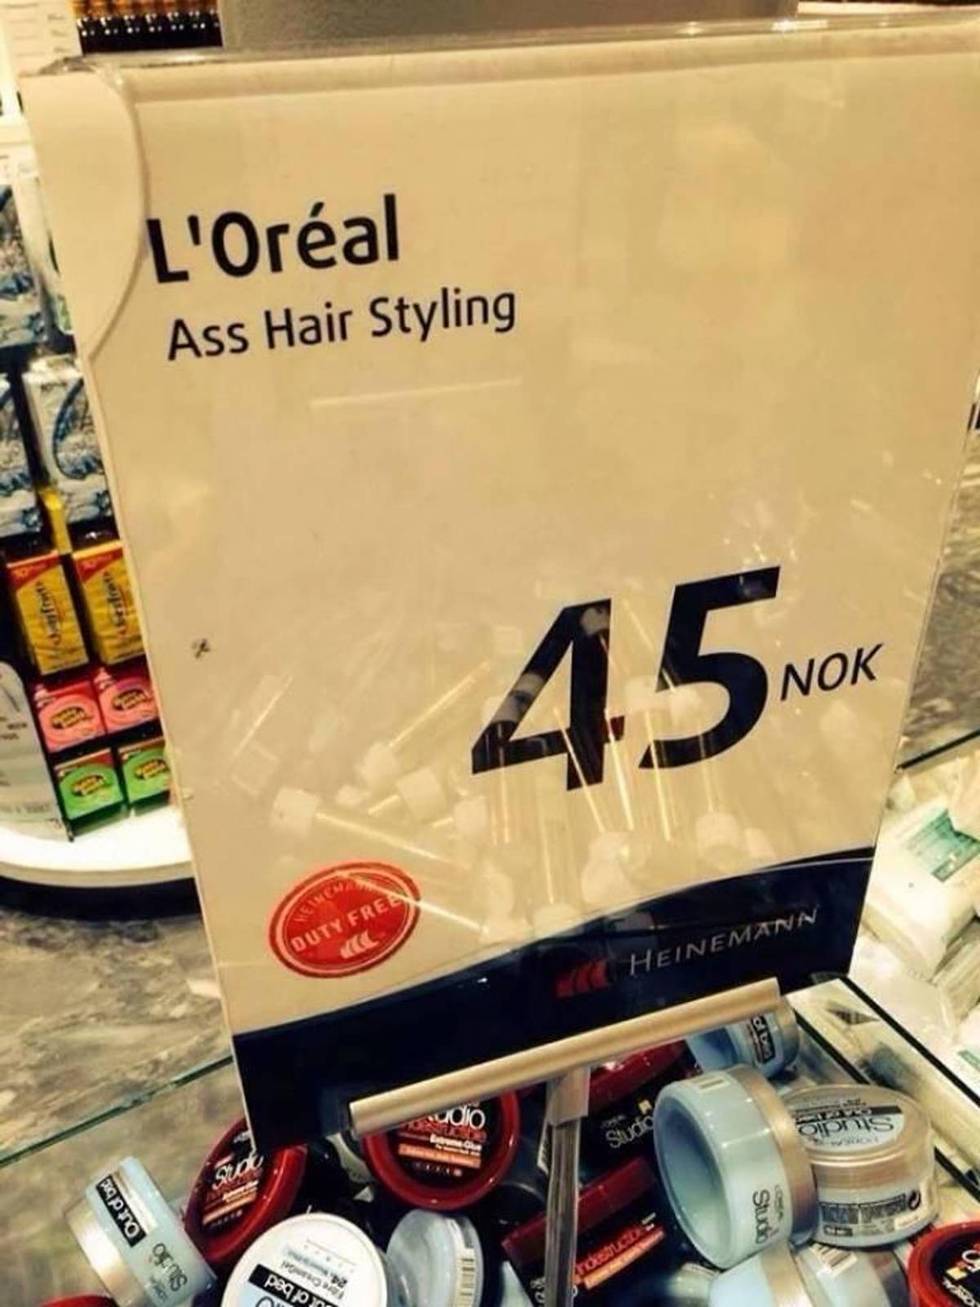 New hair styling product.